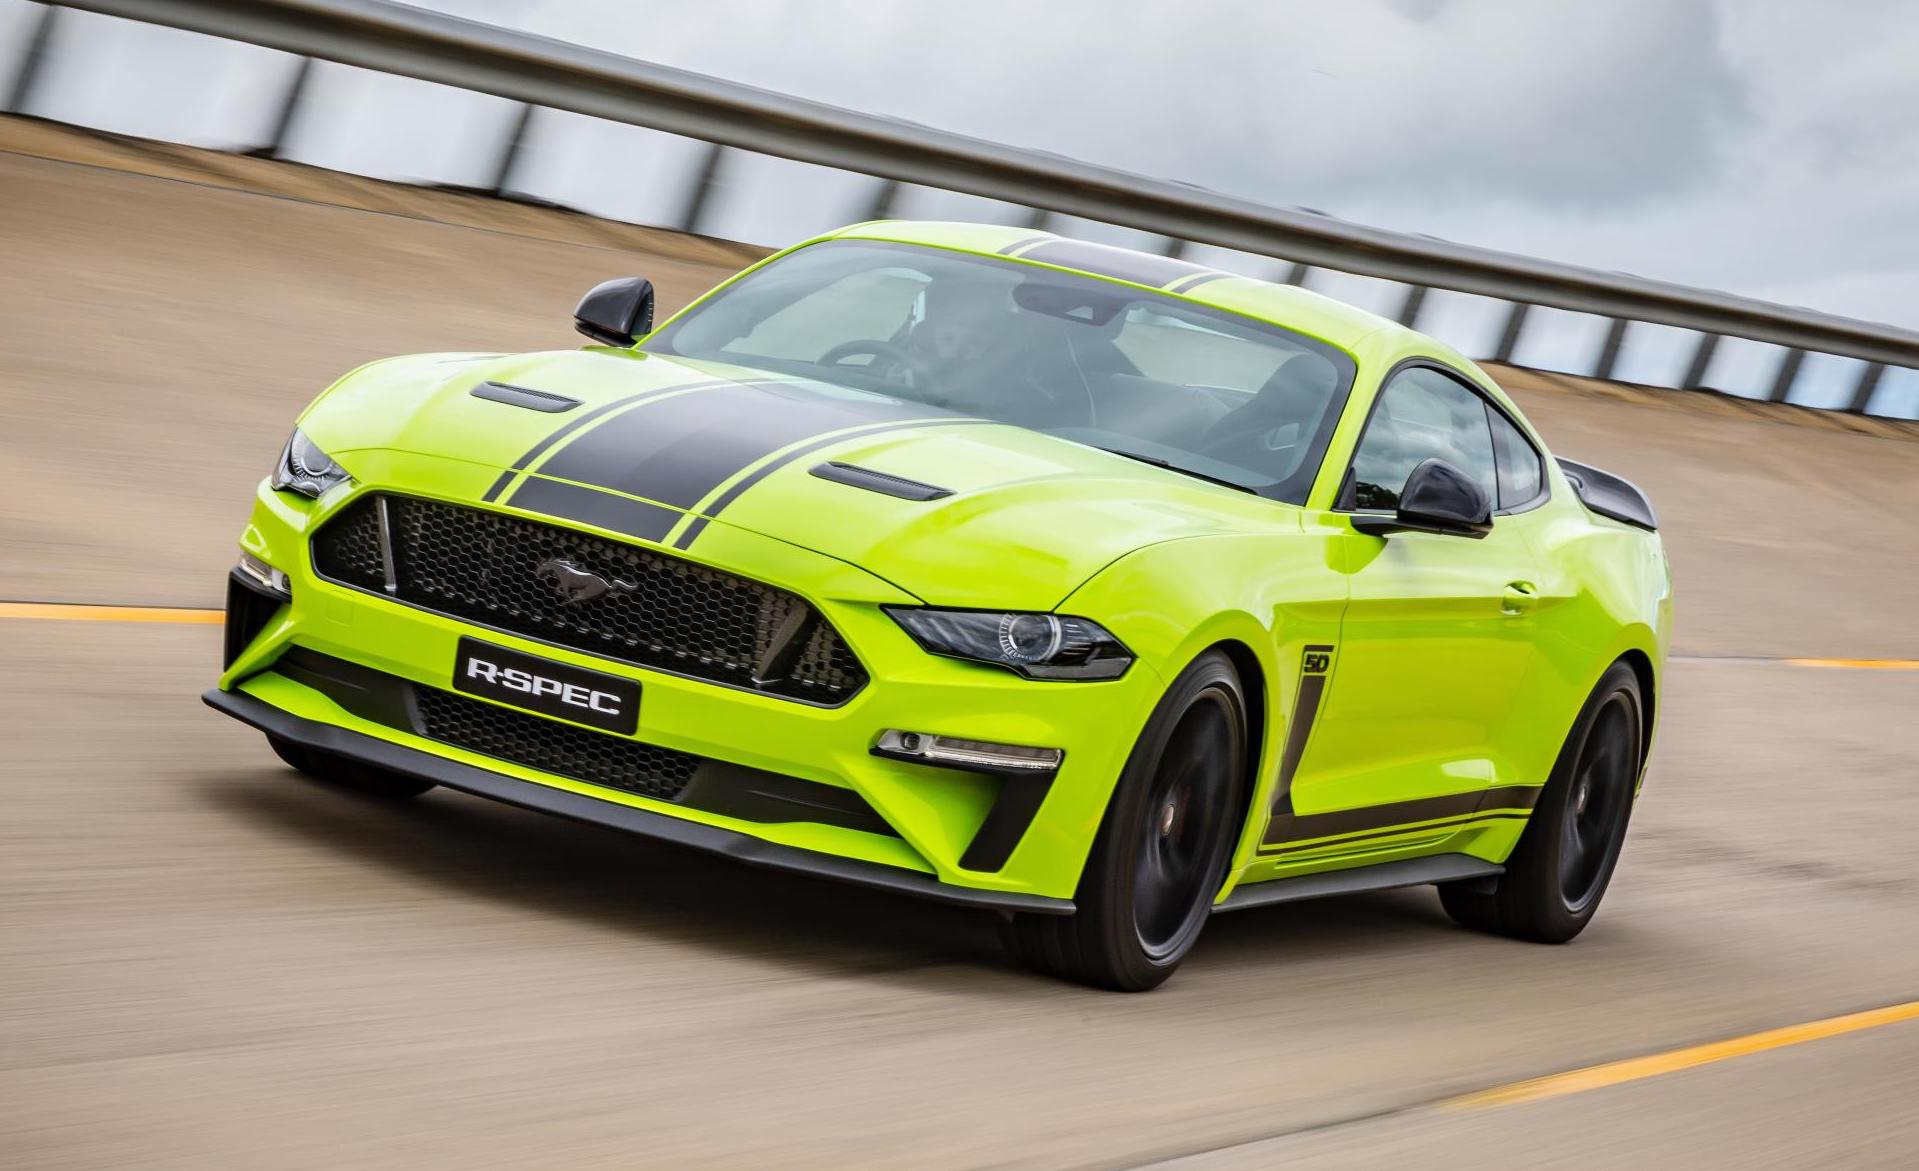 Supercharged Ford Mustang RSPEC on sale in Australia PerformanceDrive